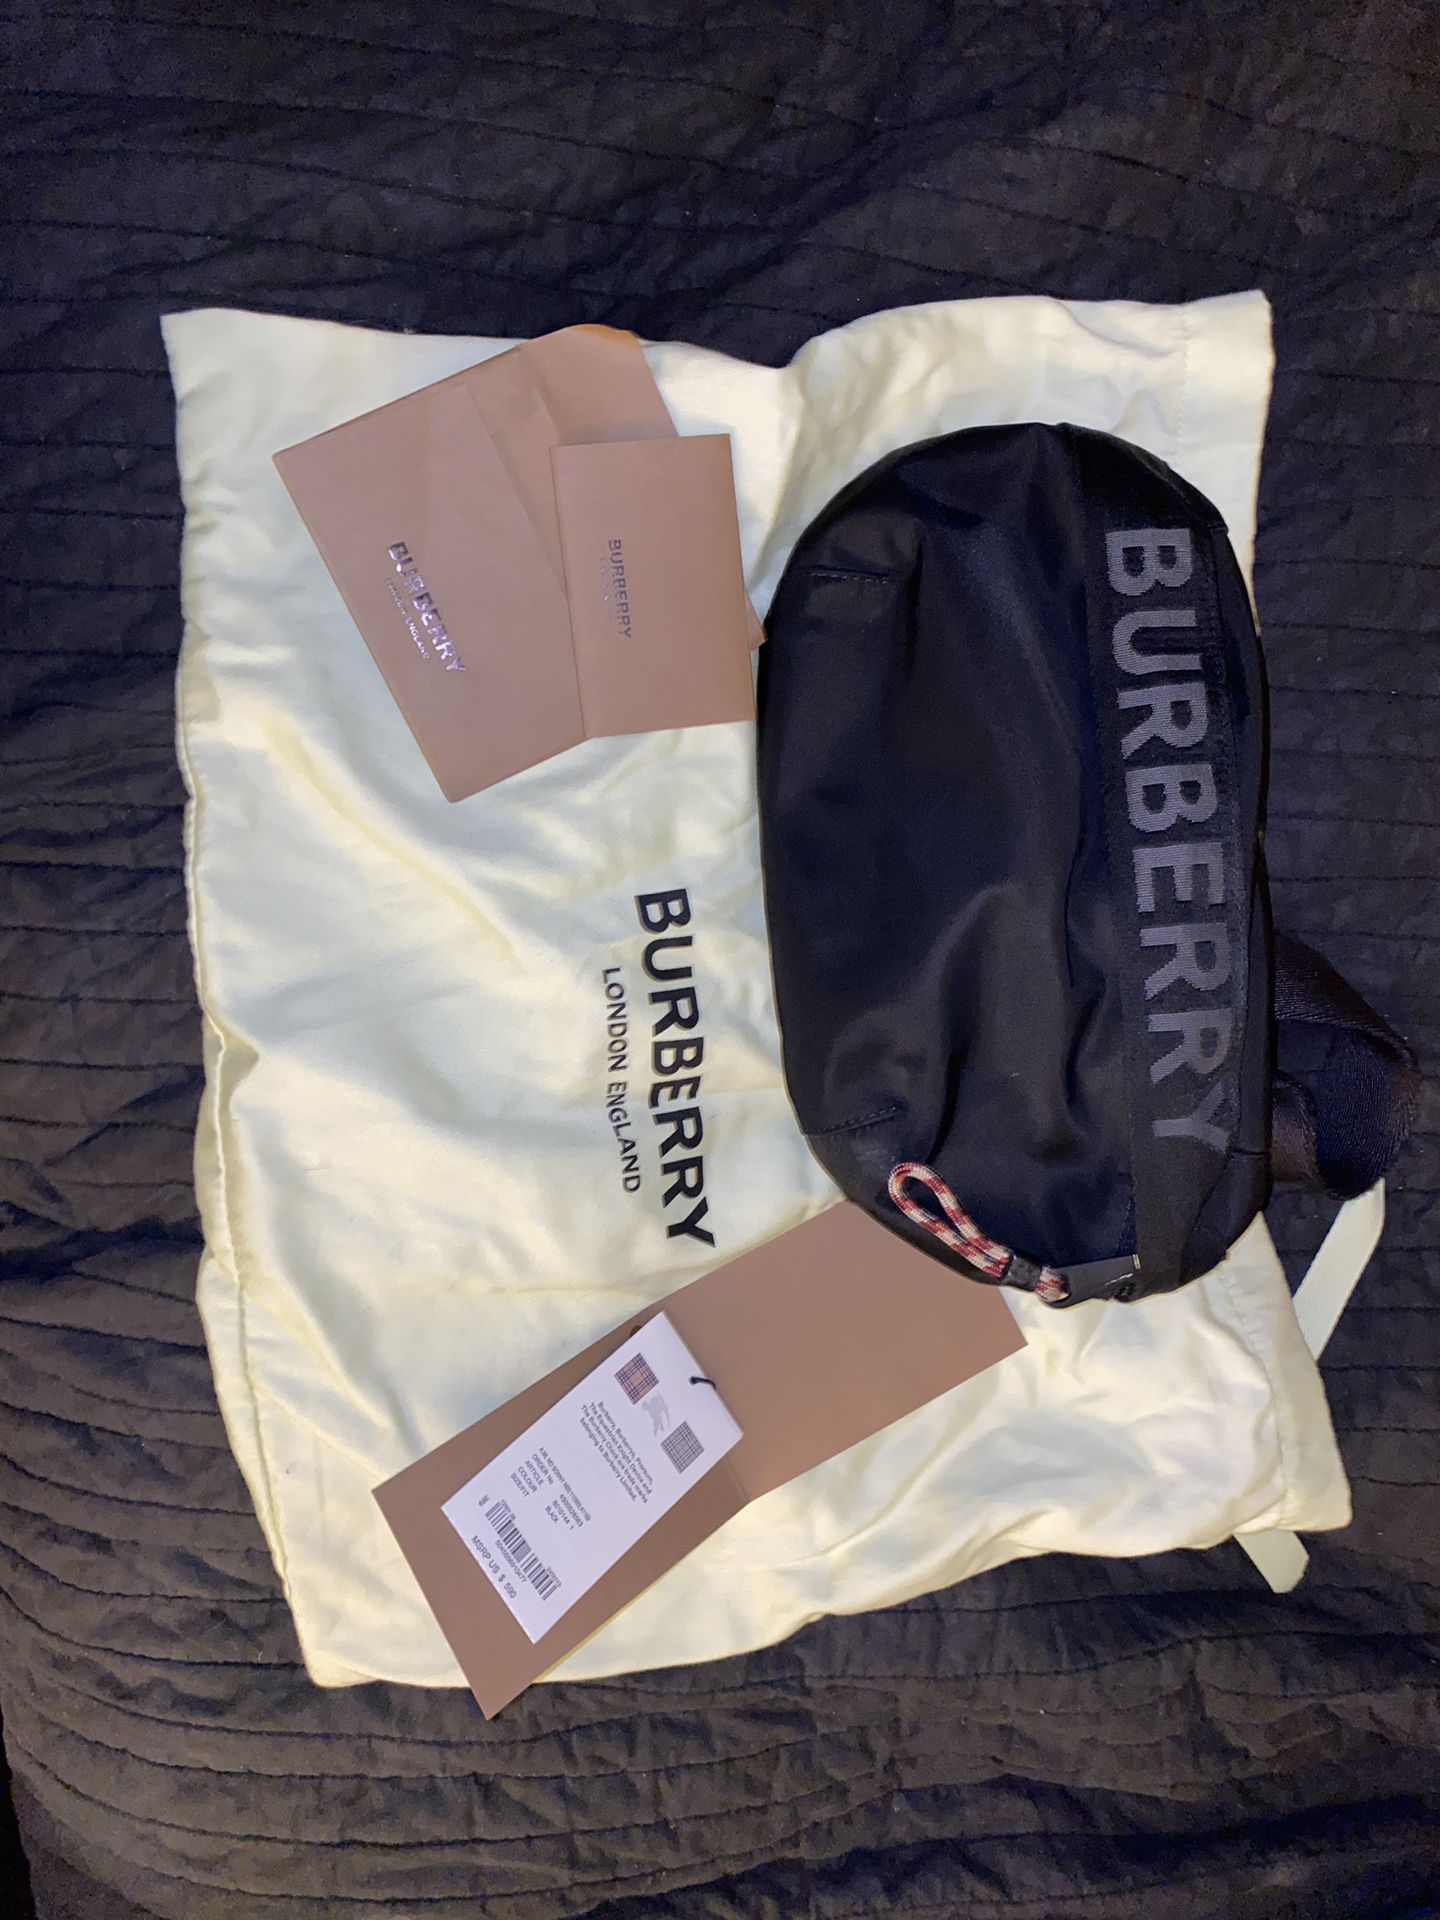 Fanny Pack Burberry